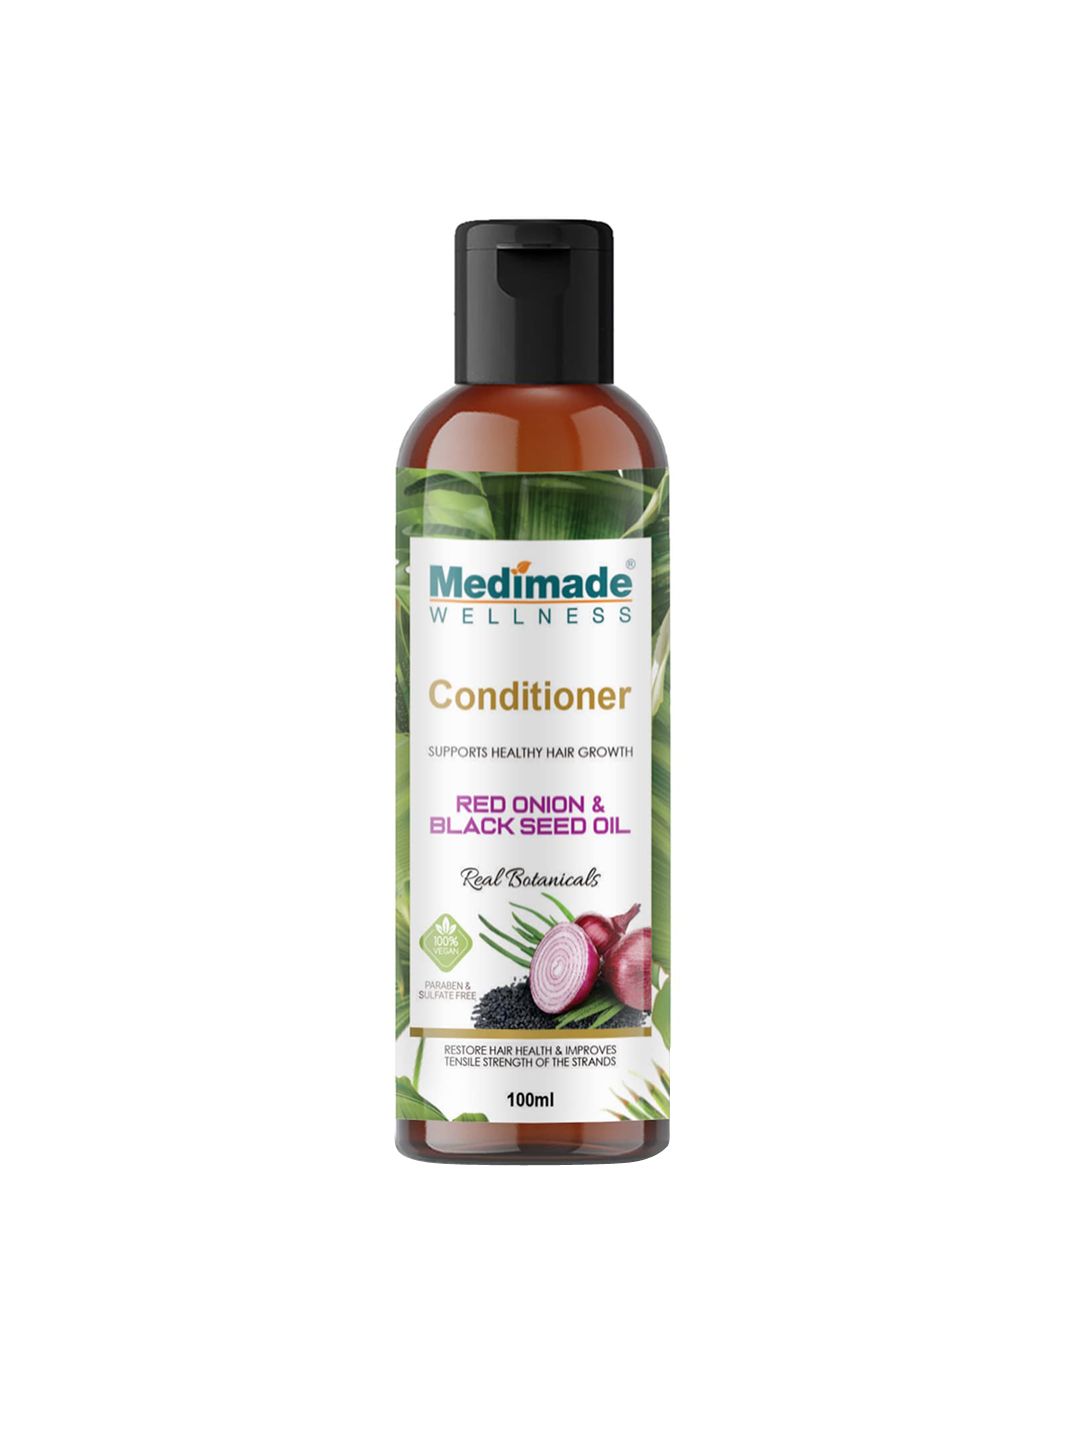 Medimade Onion & Black Seed Oil Conditioner Price in India